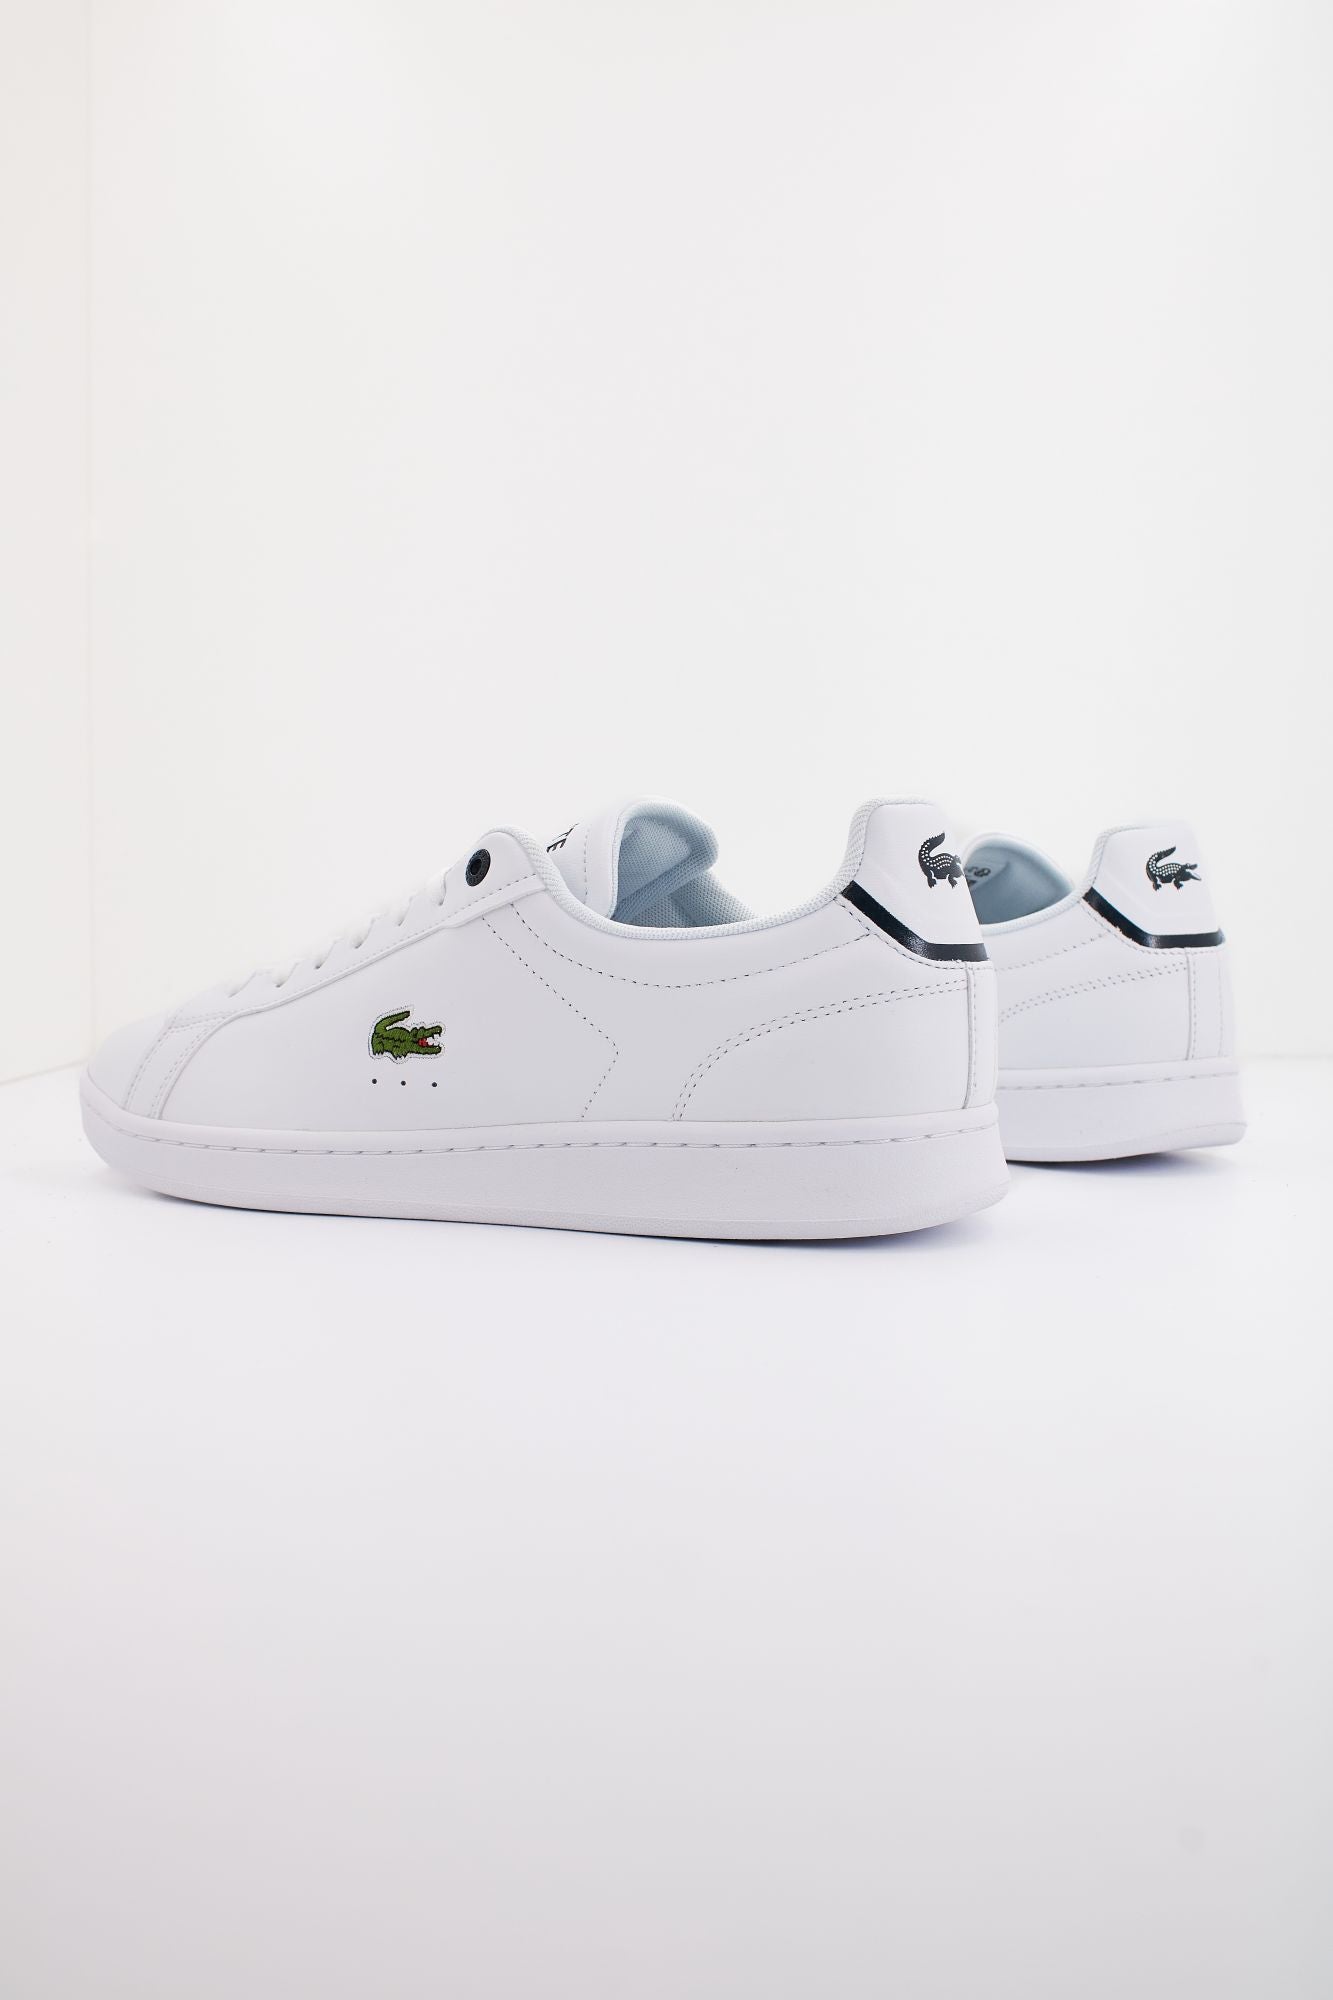 LACOSTE CARNABY PRO BL LEATHER TO en color BLANCO (3)